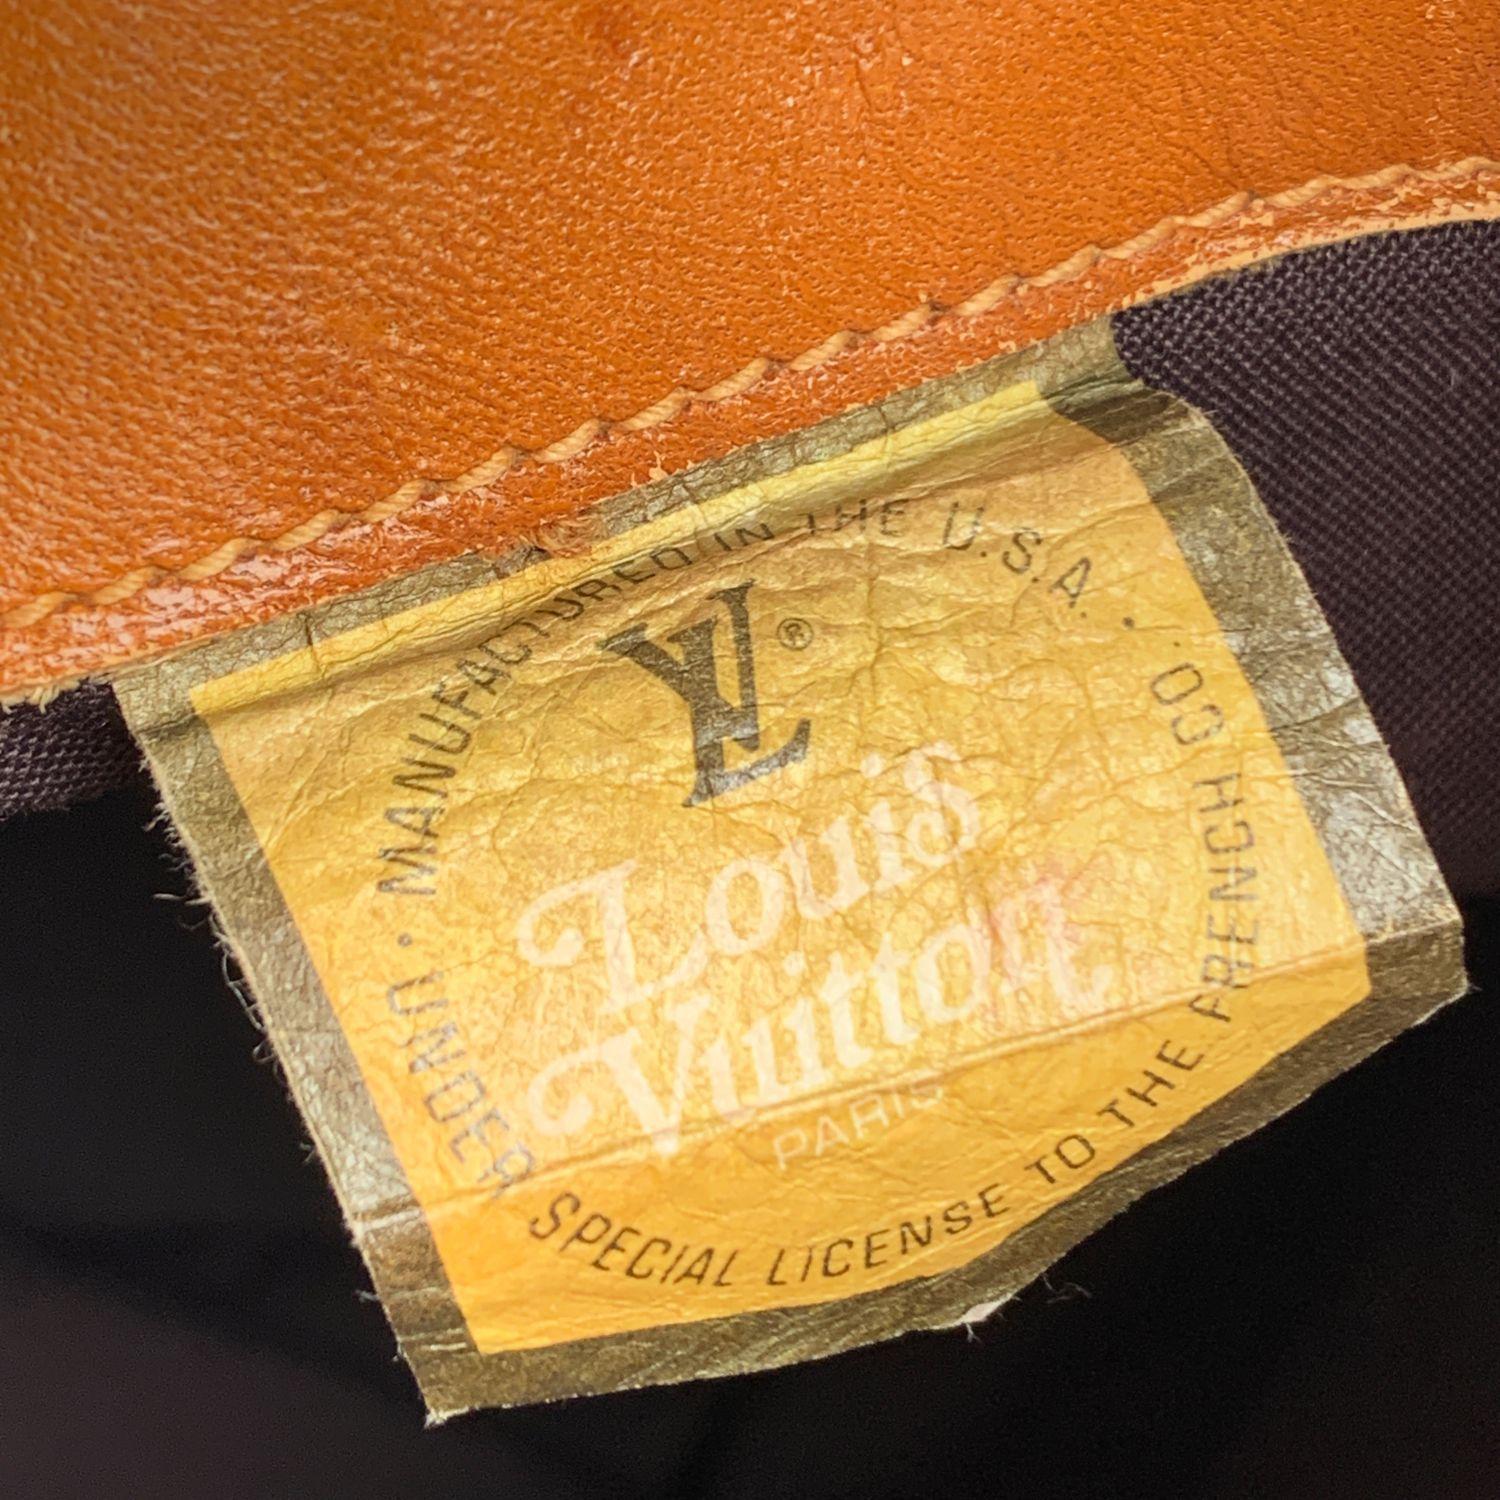 Vintage LOUIS VUITTON Monogram Bucket Bag, crafted in monogram canvas with caramel colored cowhide leather trim and handles The interior of the bag is a brown fabric with a zip pocket and a d-ring. Louis Vuitton French Company tag inside. The French